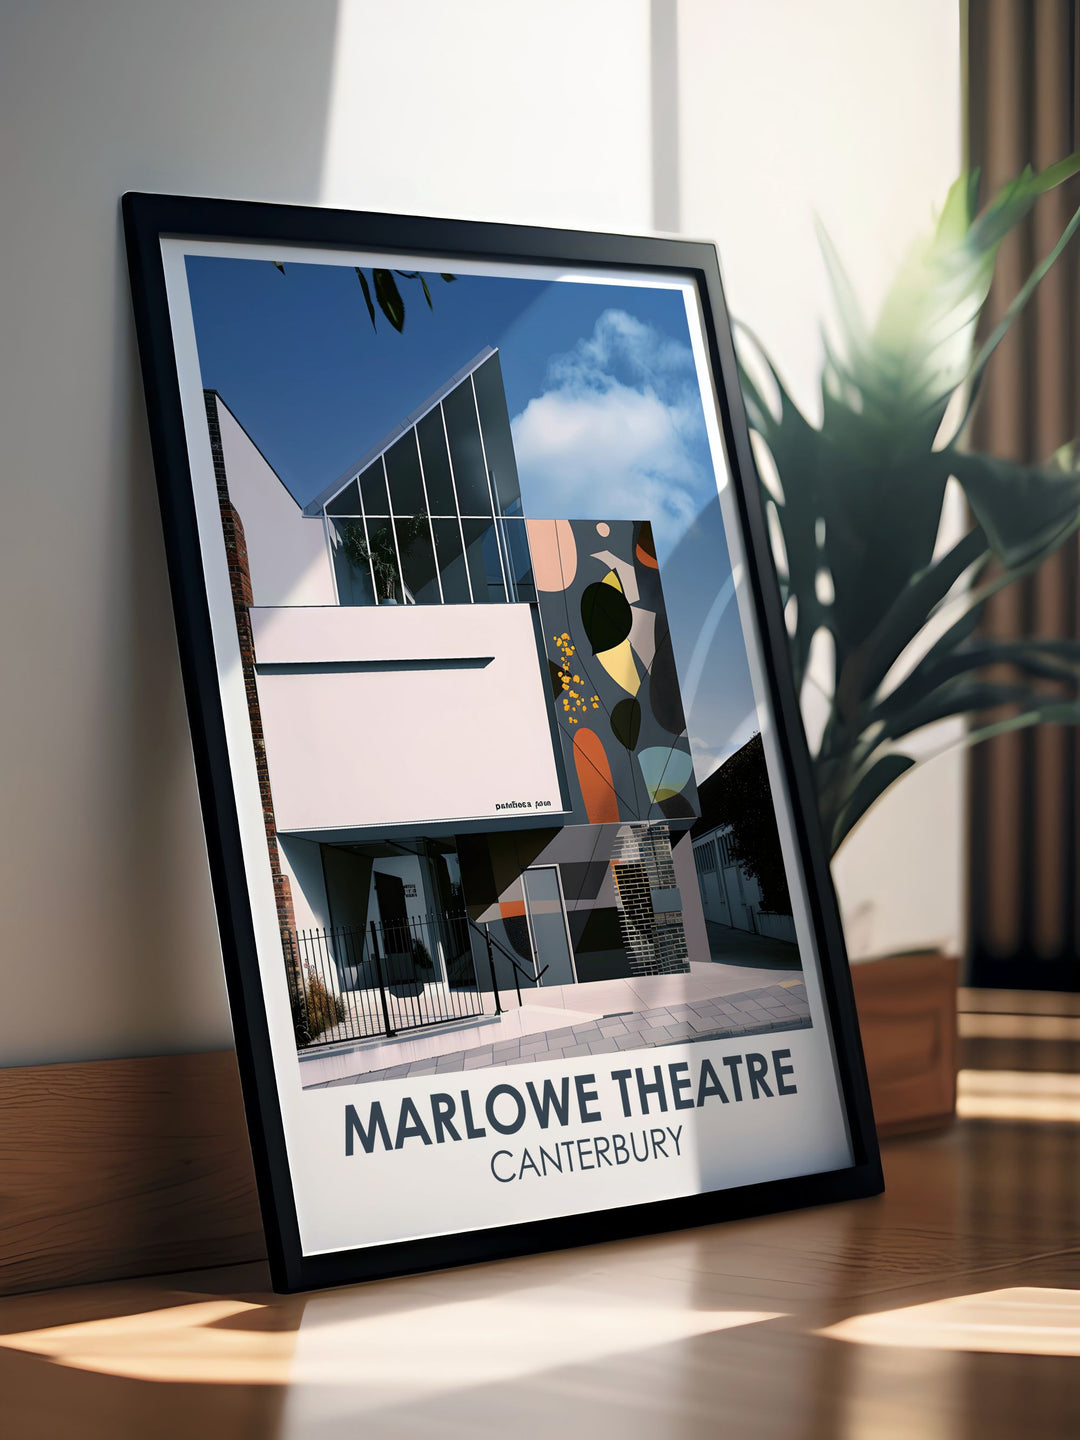 This art print beautifully depicts the Marlowe Theatre in Canterbury, showcasing its sleek glass facade and historical significance, perfect for adding a sophisticated touch to your home decor, celebrating the rich performing arts heritage of Kent.